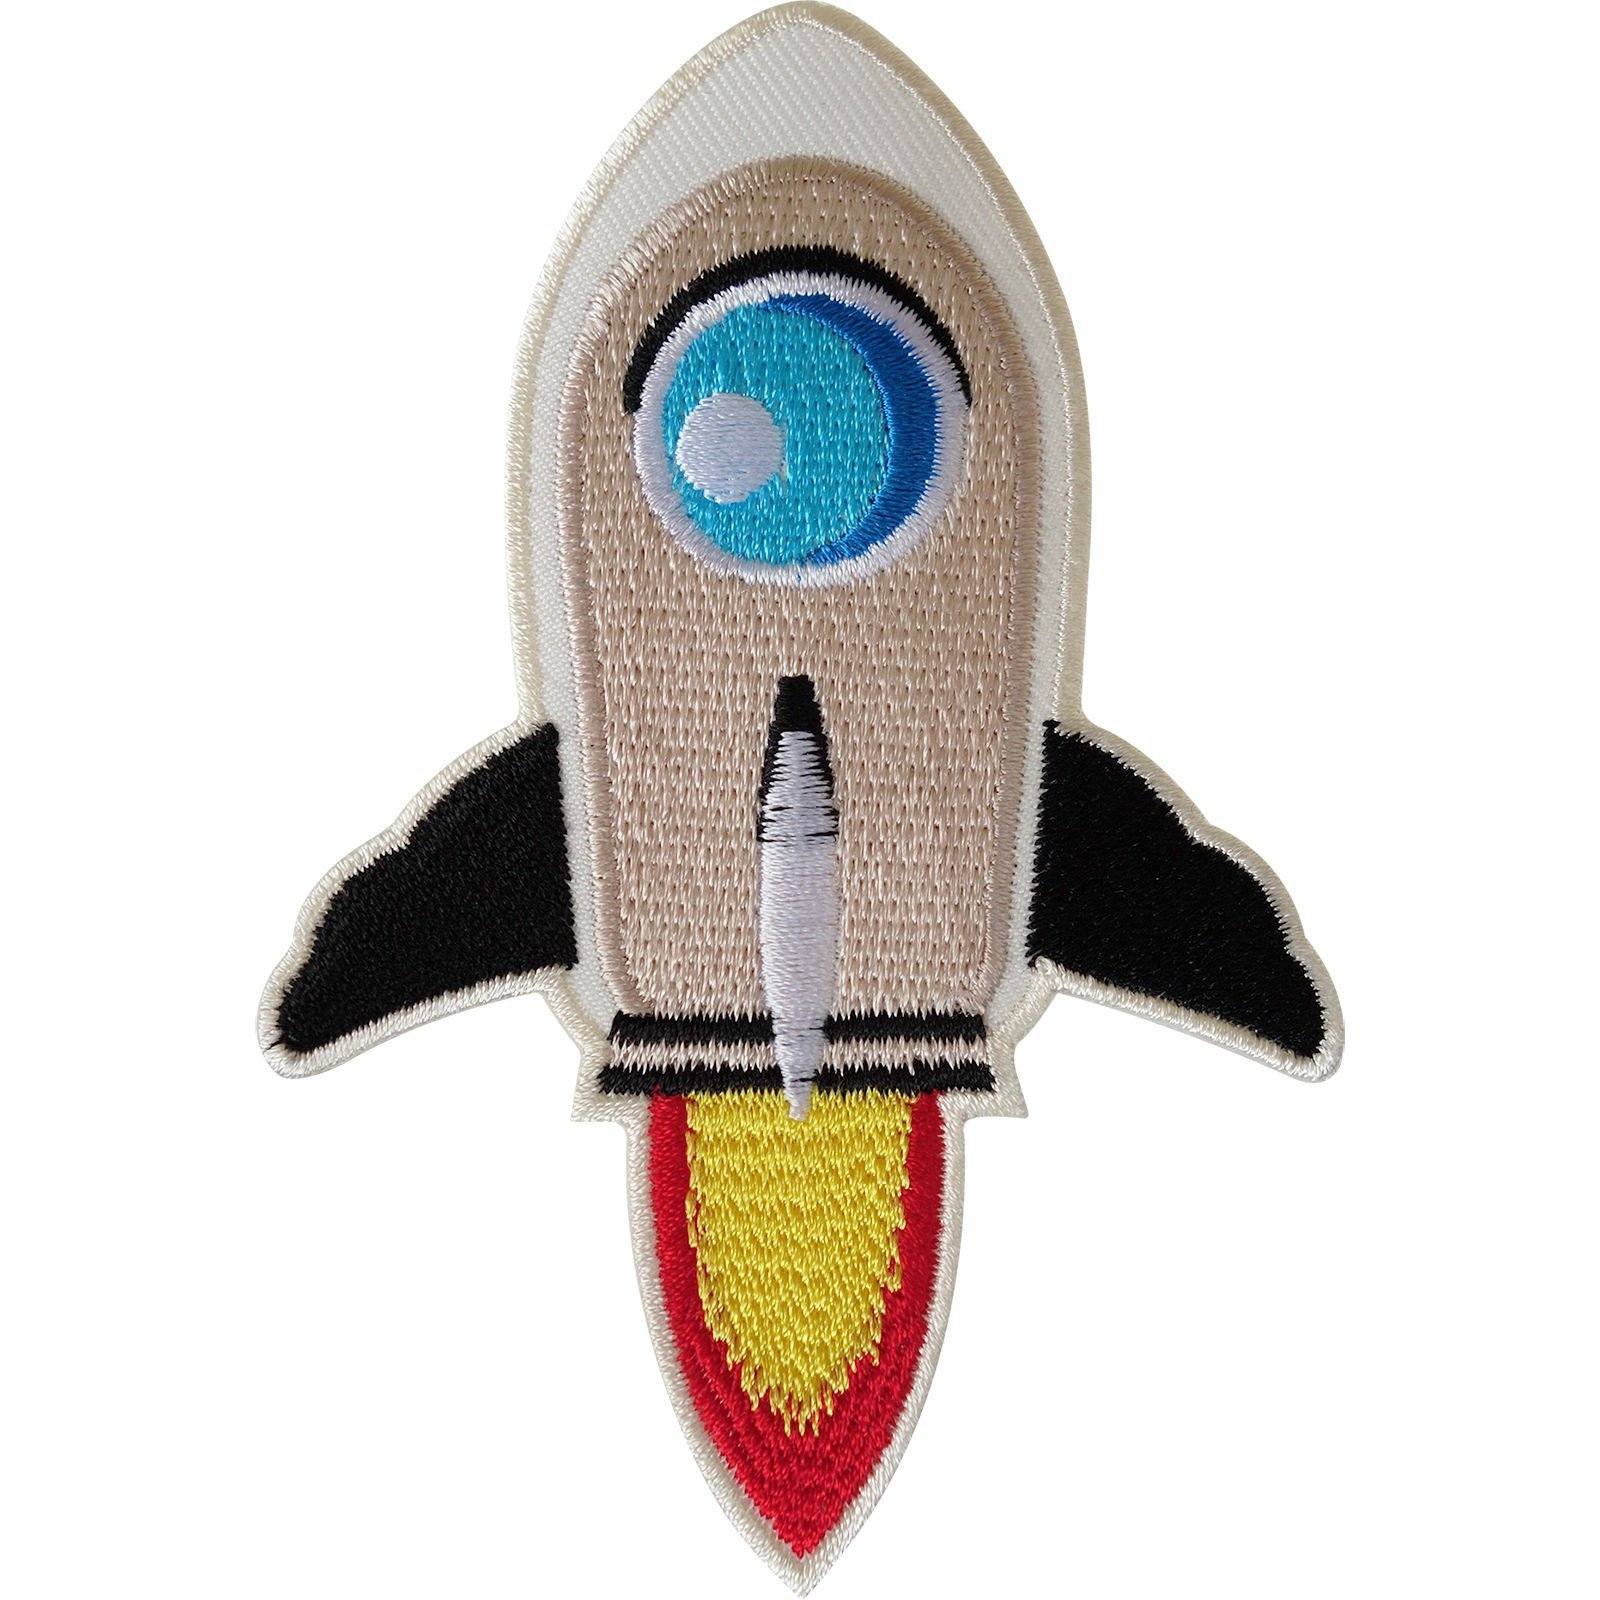 Rocket Patch Iron / Sew On Clothes Jacket Jeans Bag Space NASA Embroidered Badge